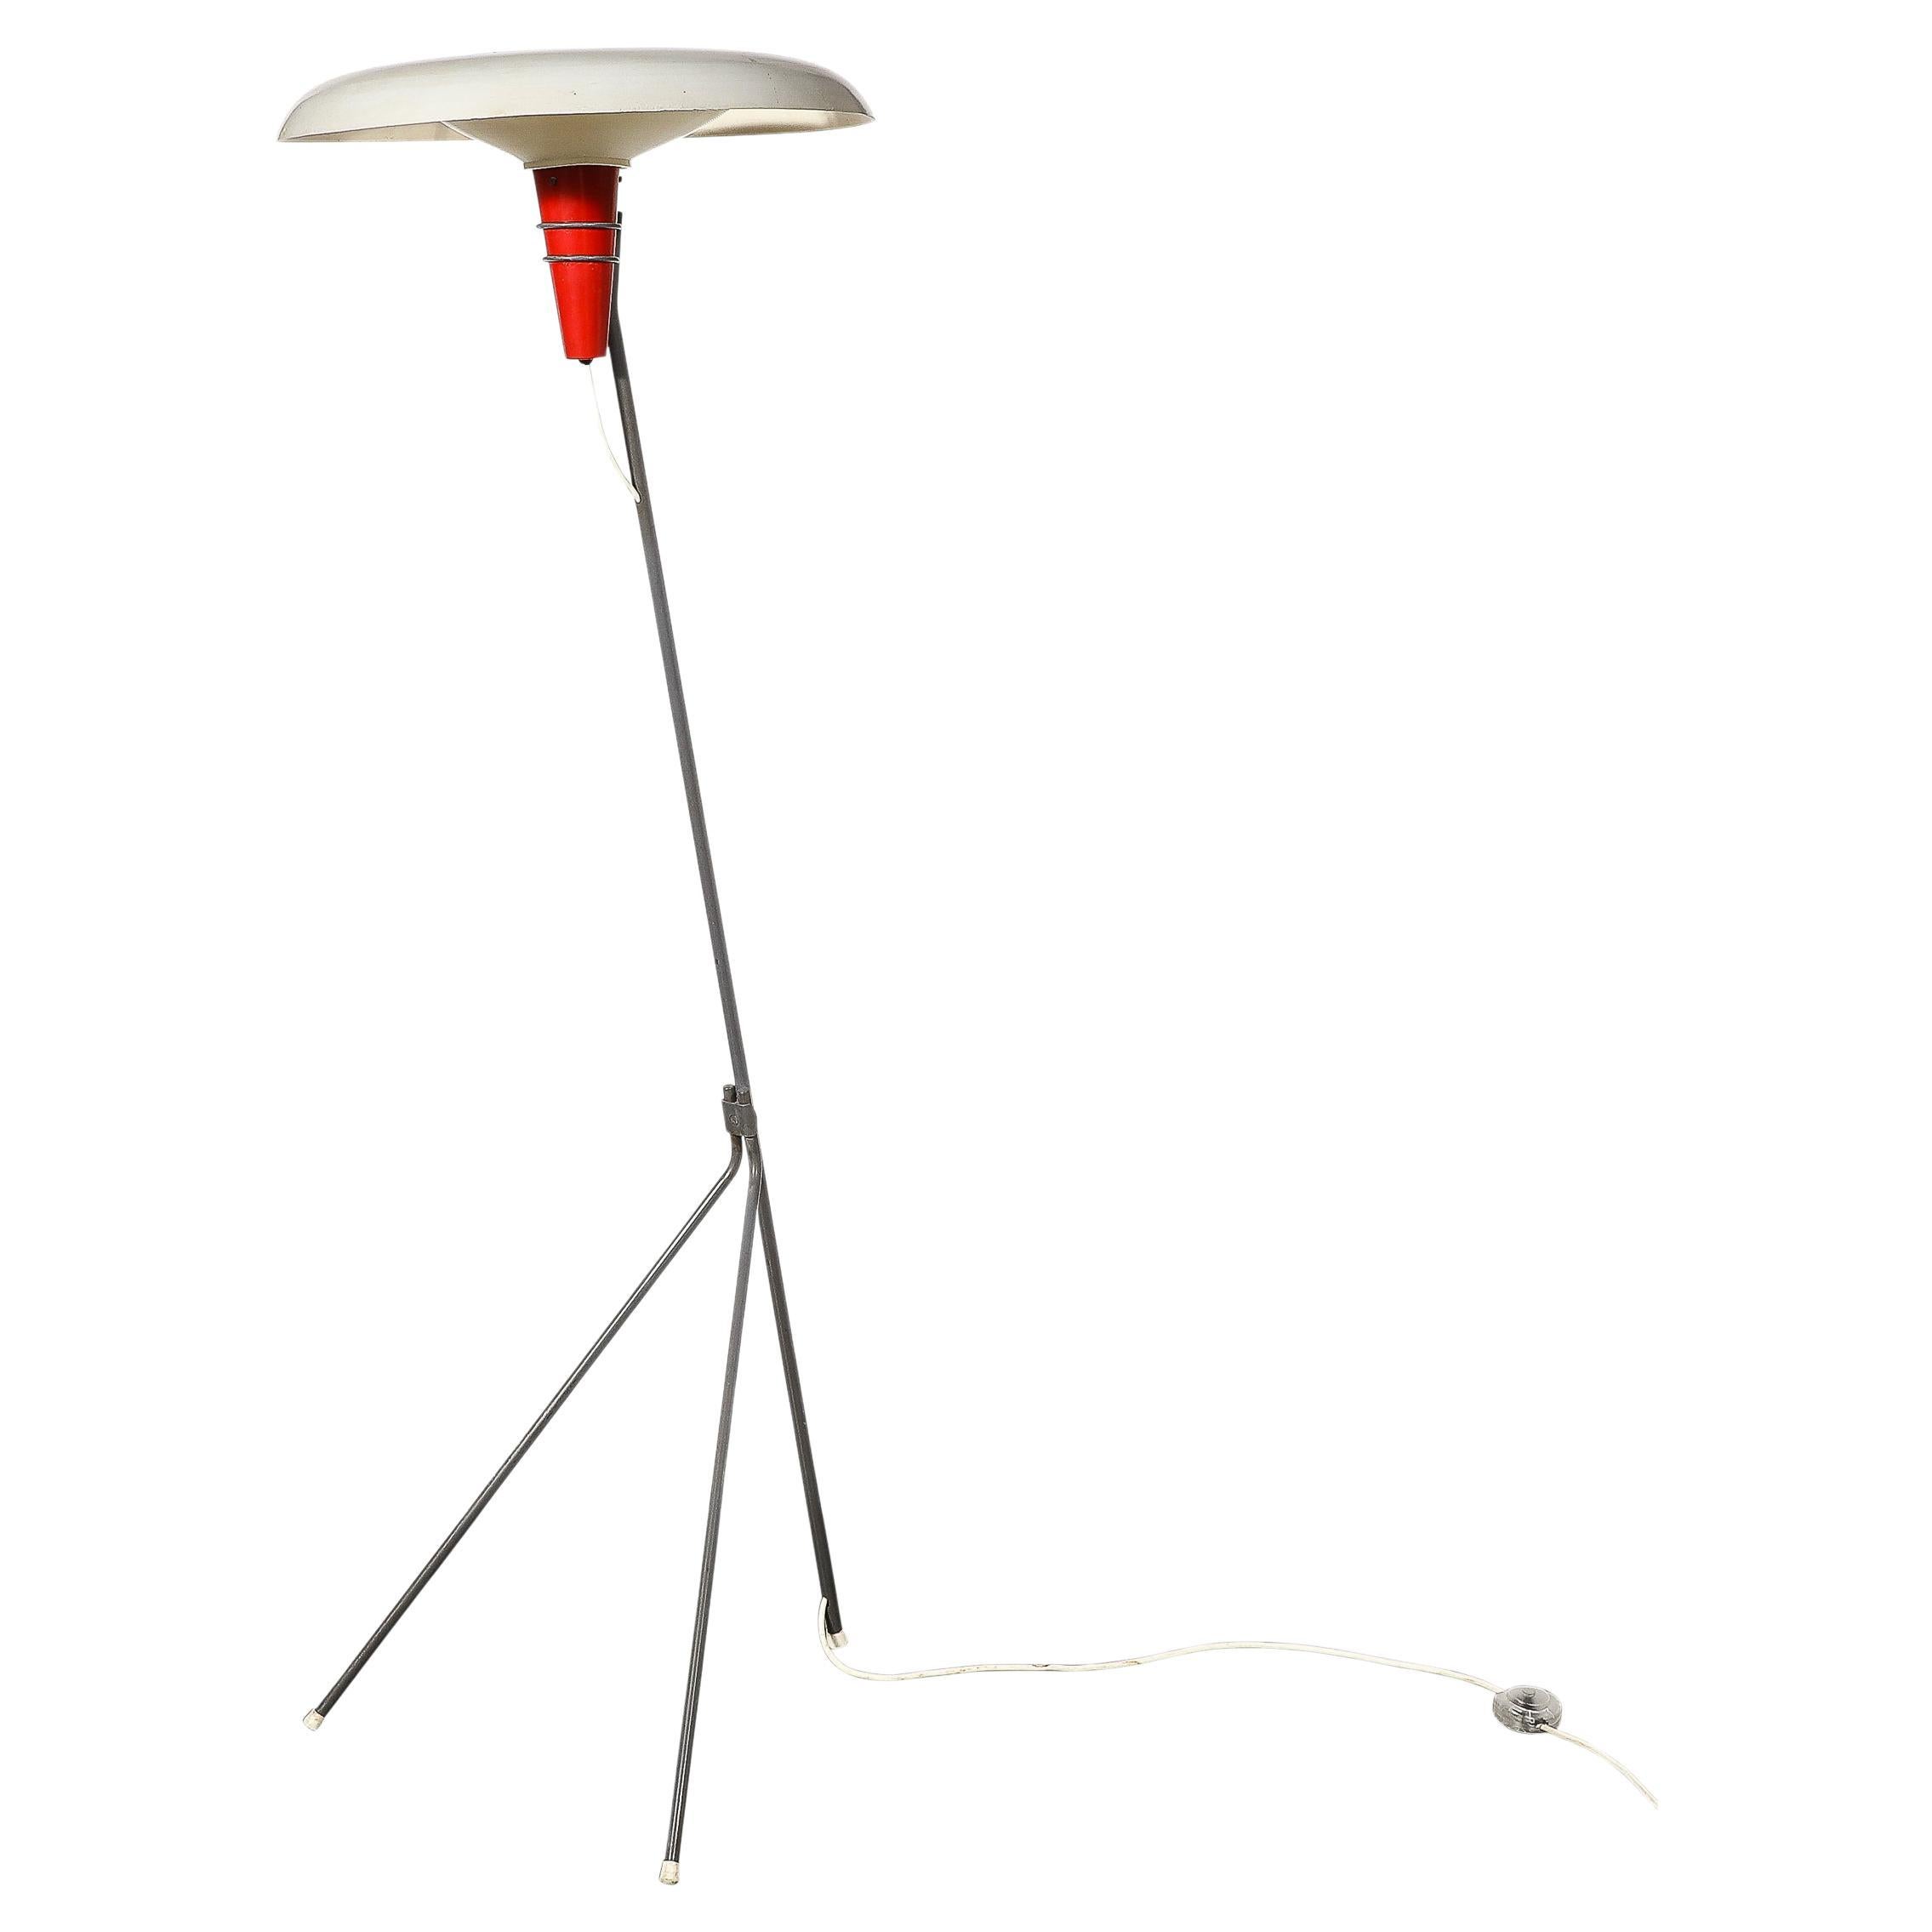 This unique and materially dynamic Mid-Century Modernist “NX38” Floor Lamp is designed by Louis Kalff for Philips and originates from the Netherlands, Circa 1950. Features a large saucer form shade in off white enameled metal. Beneath the lip of the